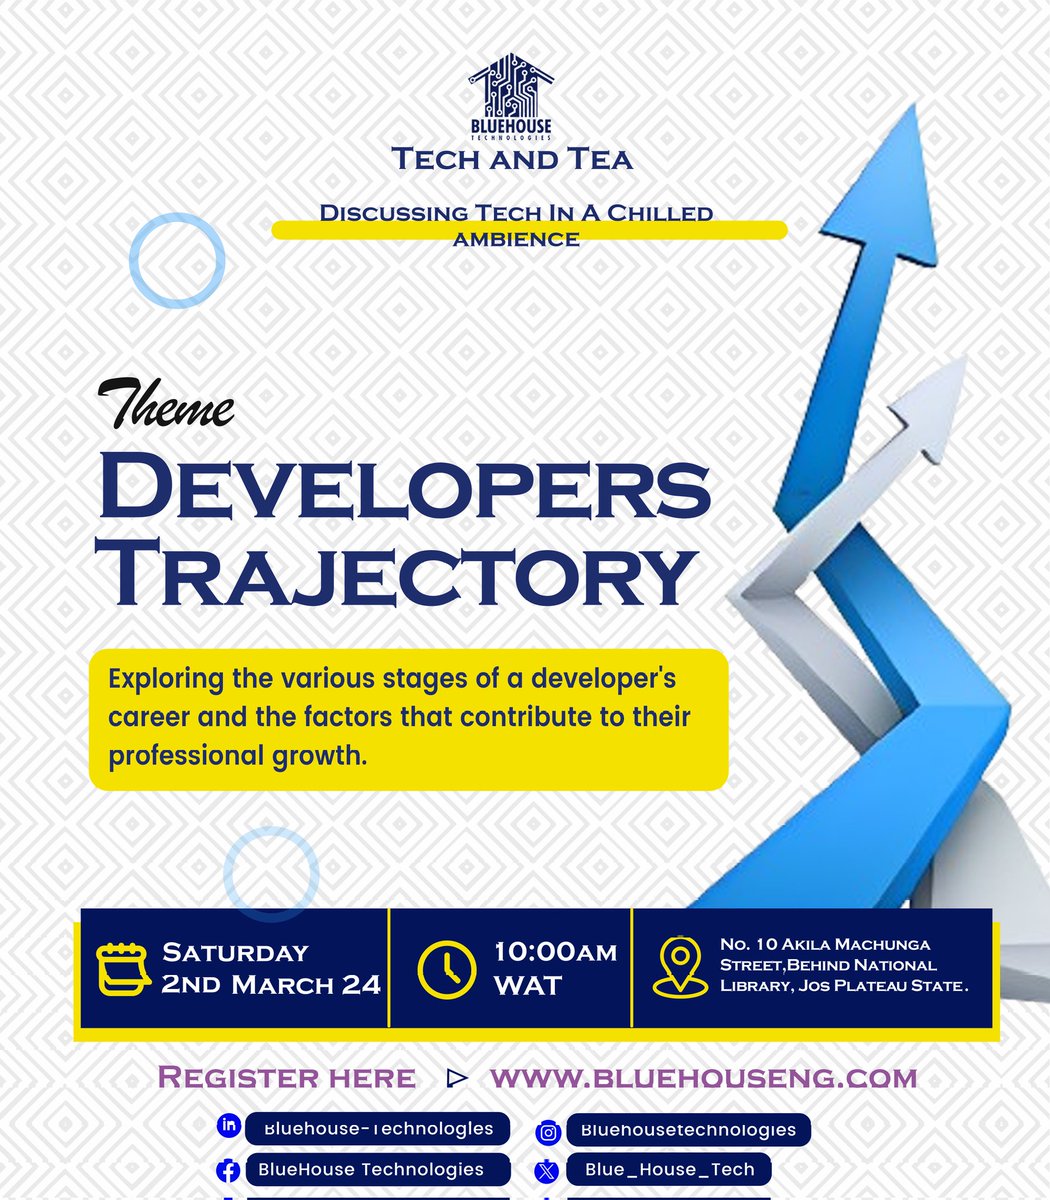 Join us at the upcoming #TechAndTea event where we'll be exploring different career paths in tech. 

Don't miss out on this opportunity to level up your career! 

#TechAndTea #Developer #CareerPaths #SkillDevelopment #bluehouse #techjobs